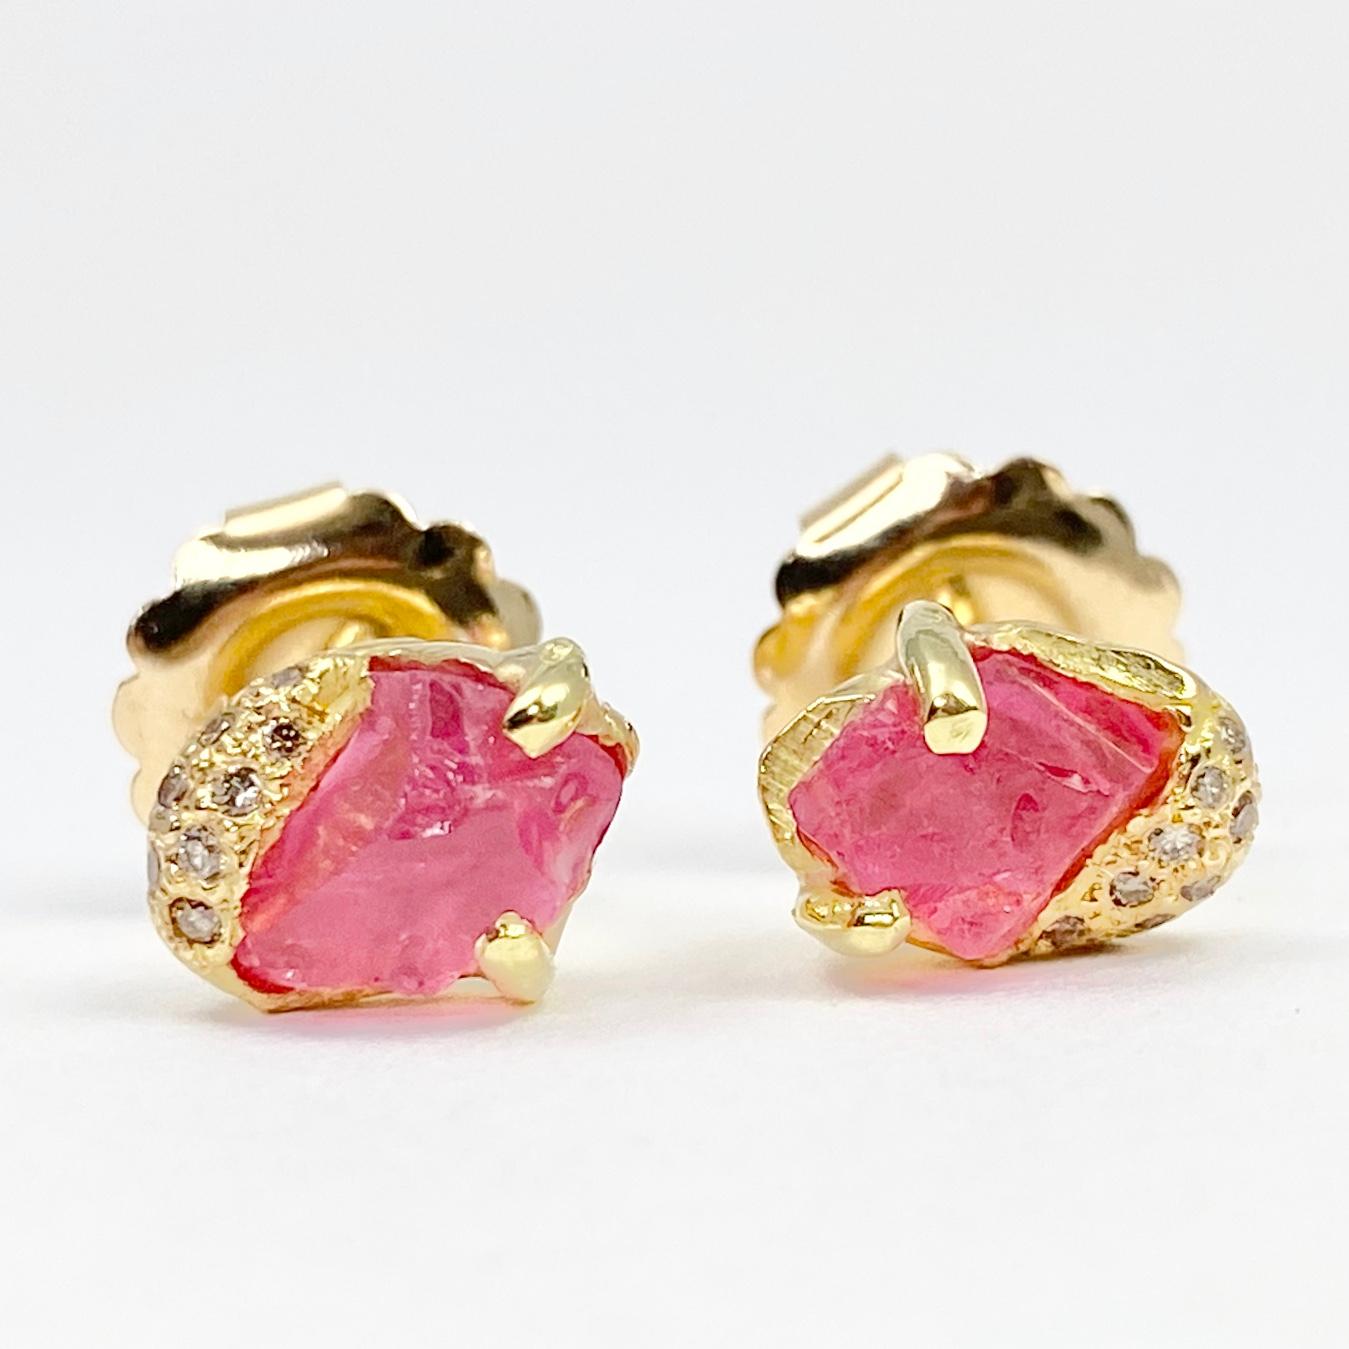 This pair of Pia stud earrings is hand-crafted with 18-karat recycled yellow gold, and features two untreated, Tenda Cut, natural color pink spinel; and 17 round champagne accent diamonds. The Pia stud is hand-made to accommodate each unique